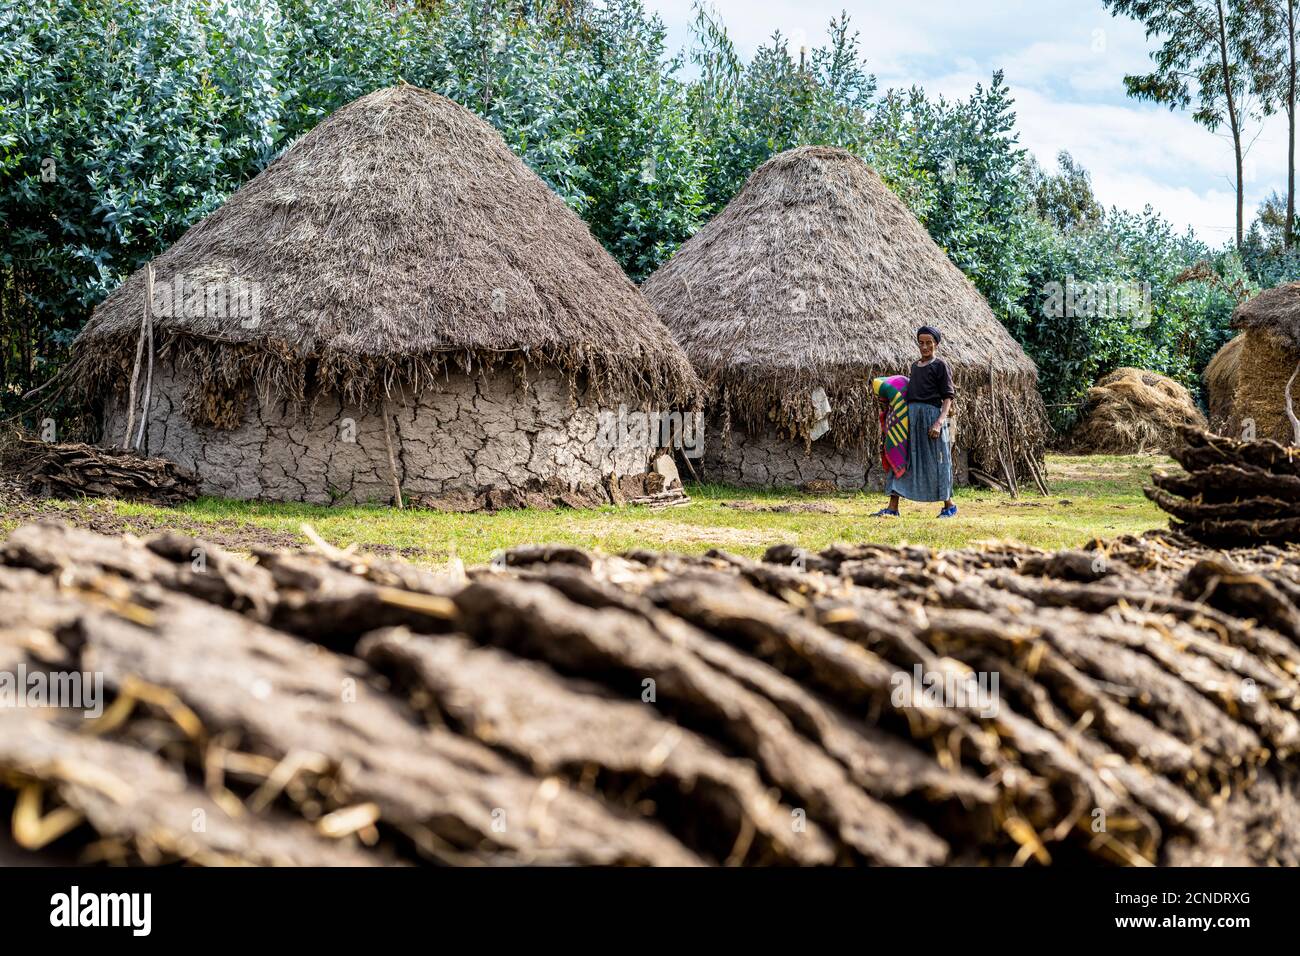 Drying dung used for fuel for the rural village, Wollo Province, Amhara Region, Ethiopia, Africa Stock Photo